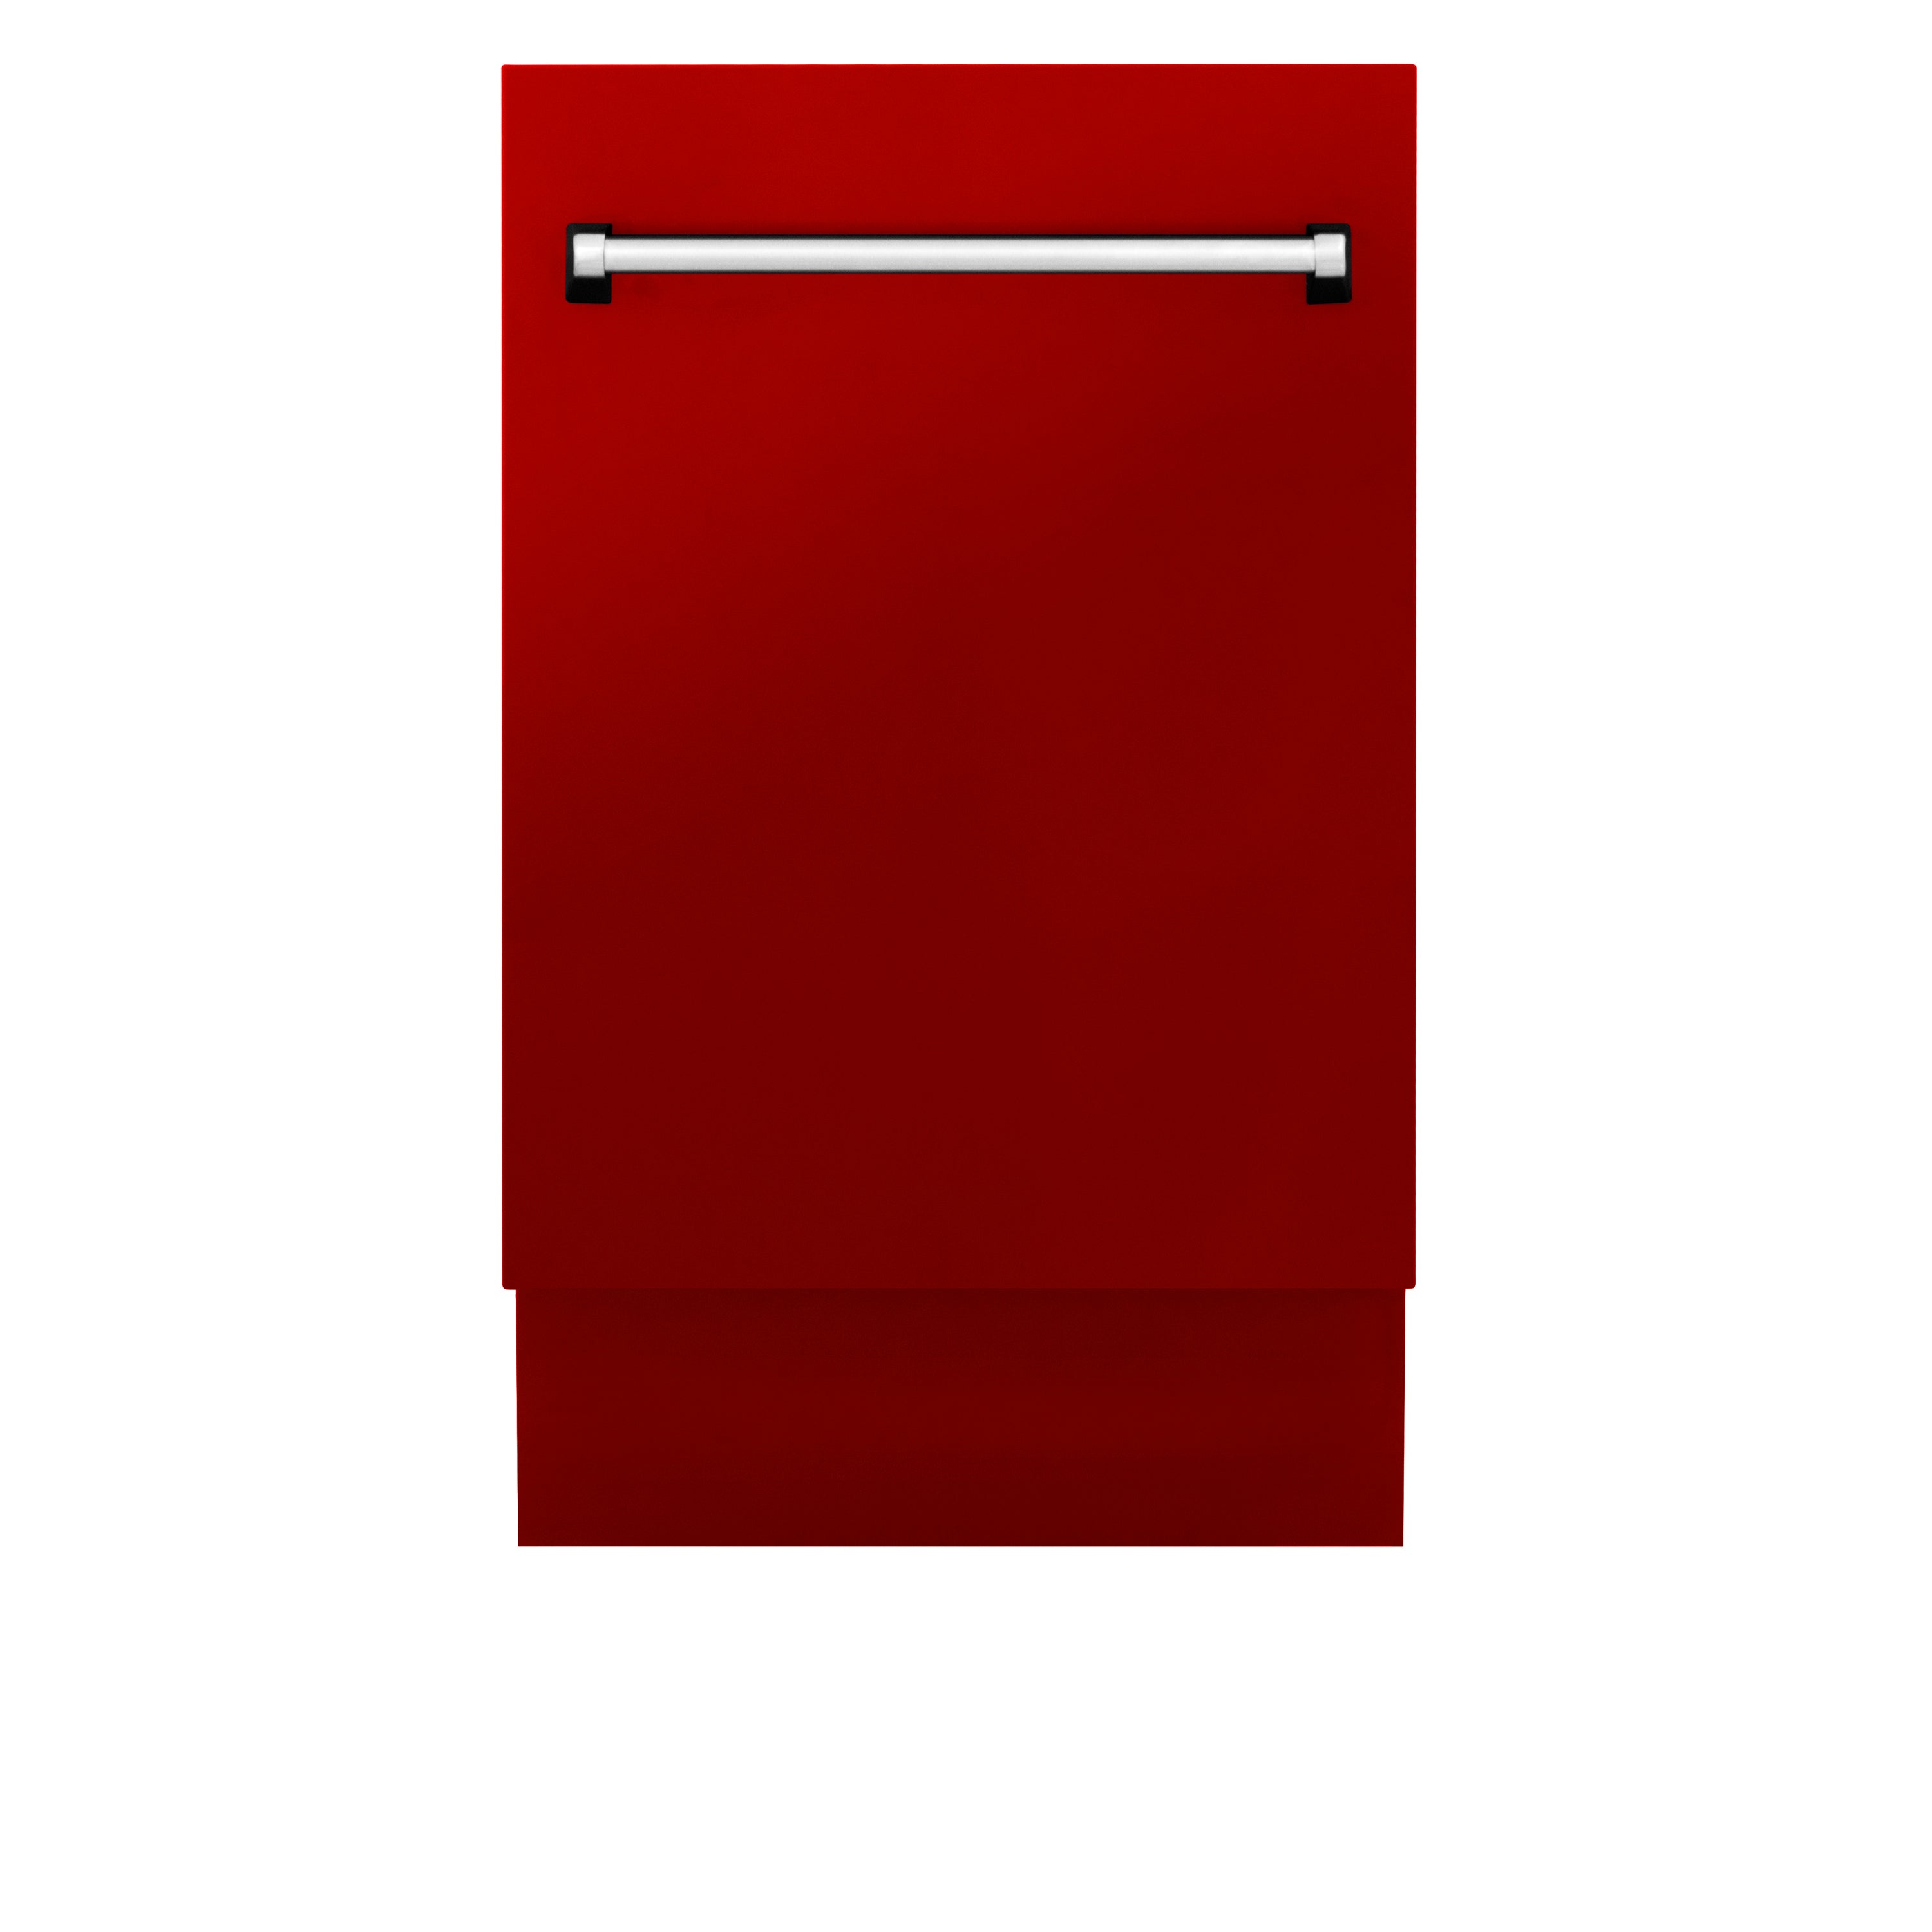 ZLINE 18" Tallac Series 3rd Rack Top Control Built-In Dishwasher in Red Gloss with Stainless Steel Tub, 51dBa (DWV-RG-18)